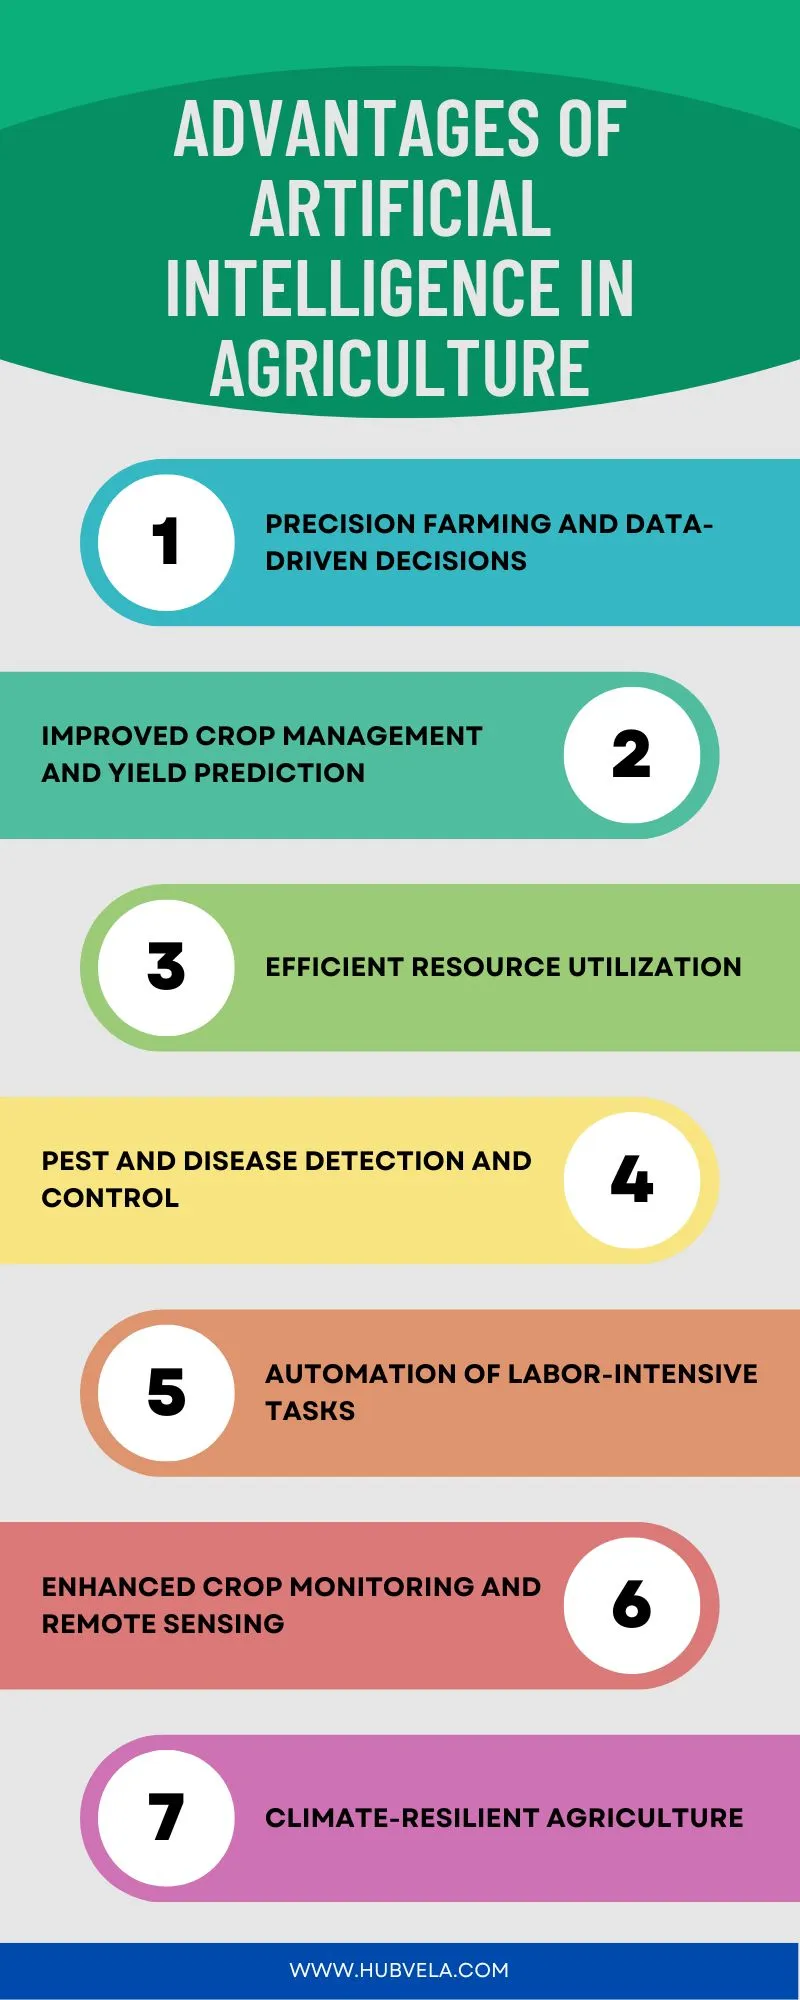 Advantages of Artificial Intelligence in Agriculture Infographic